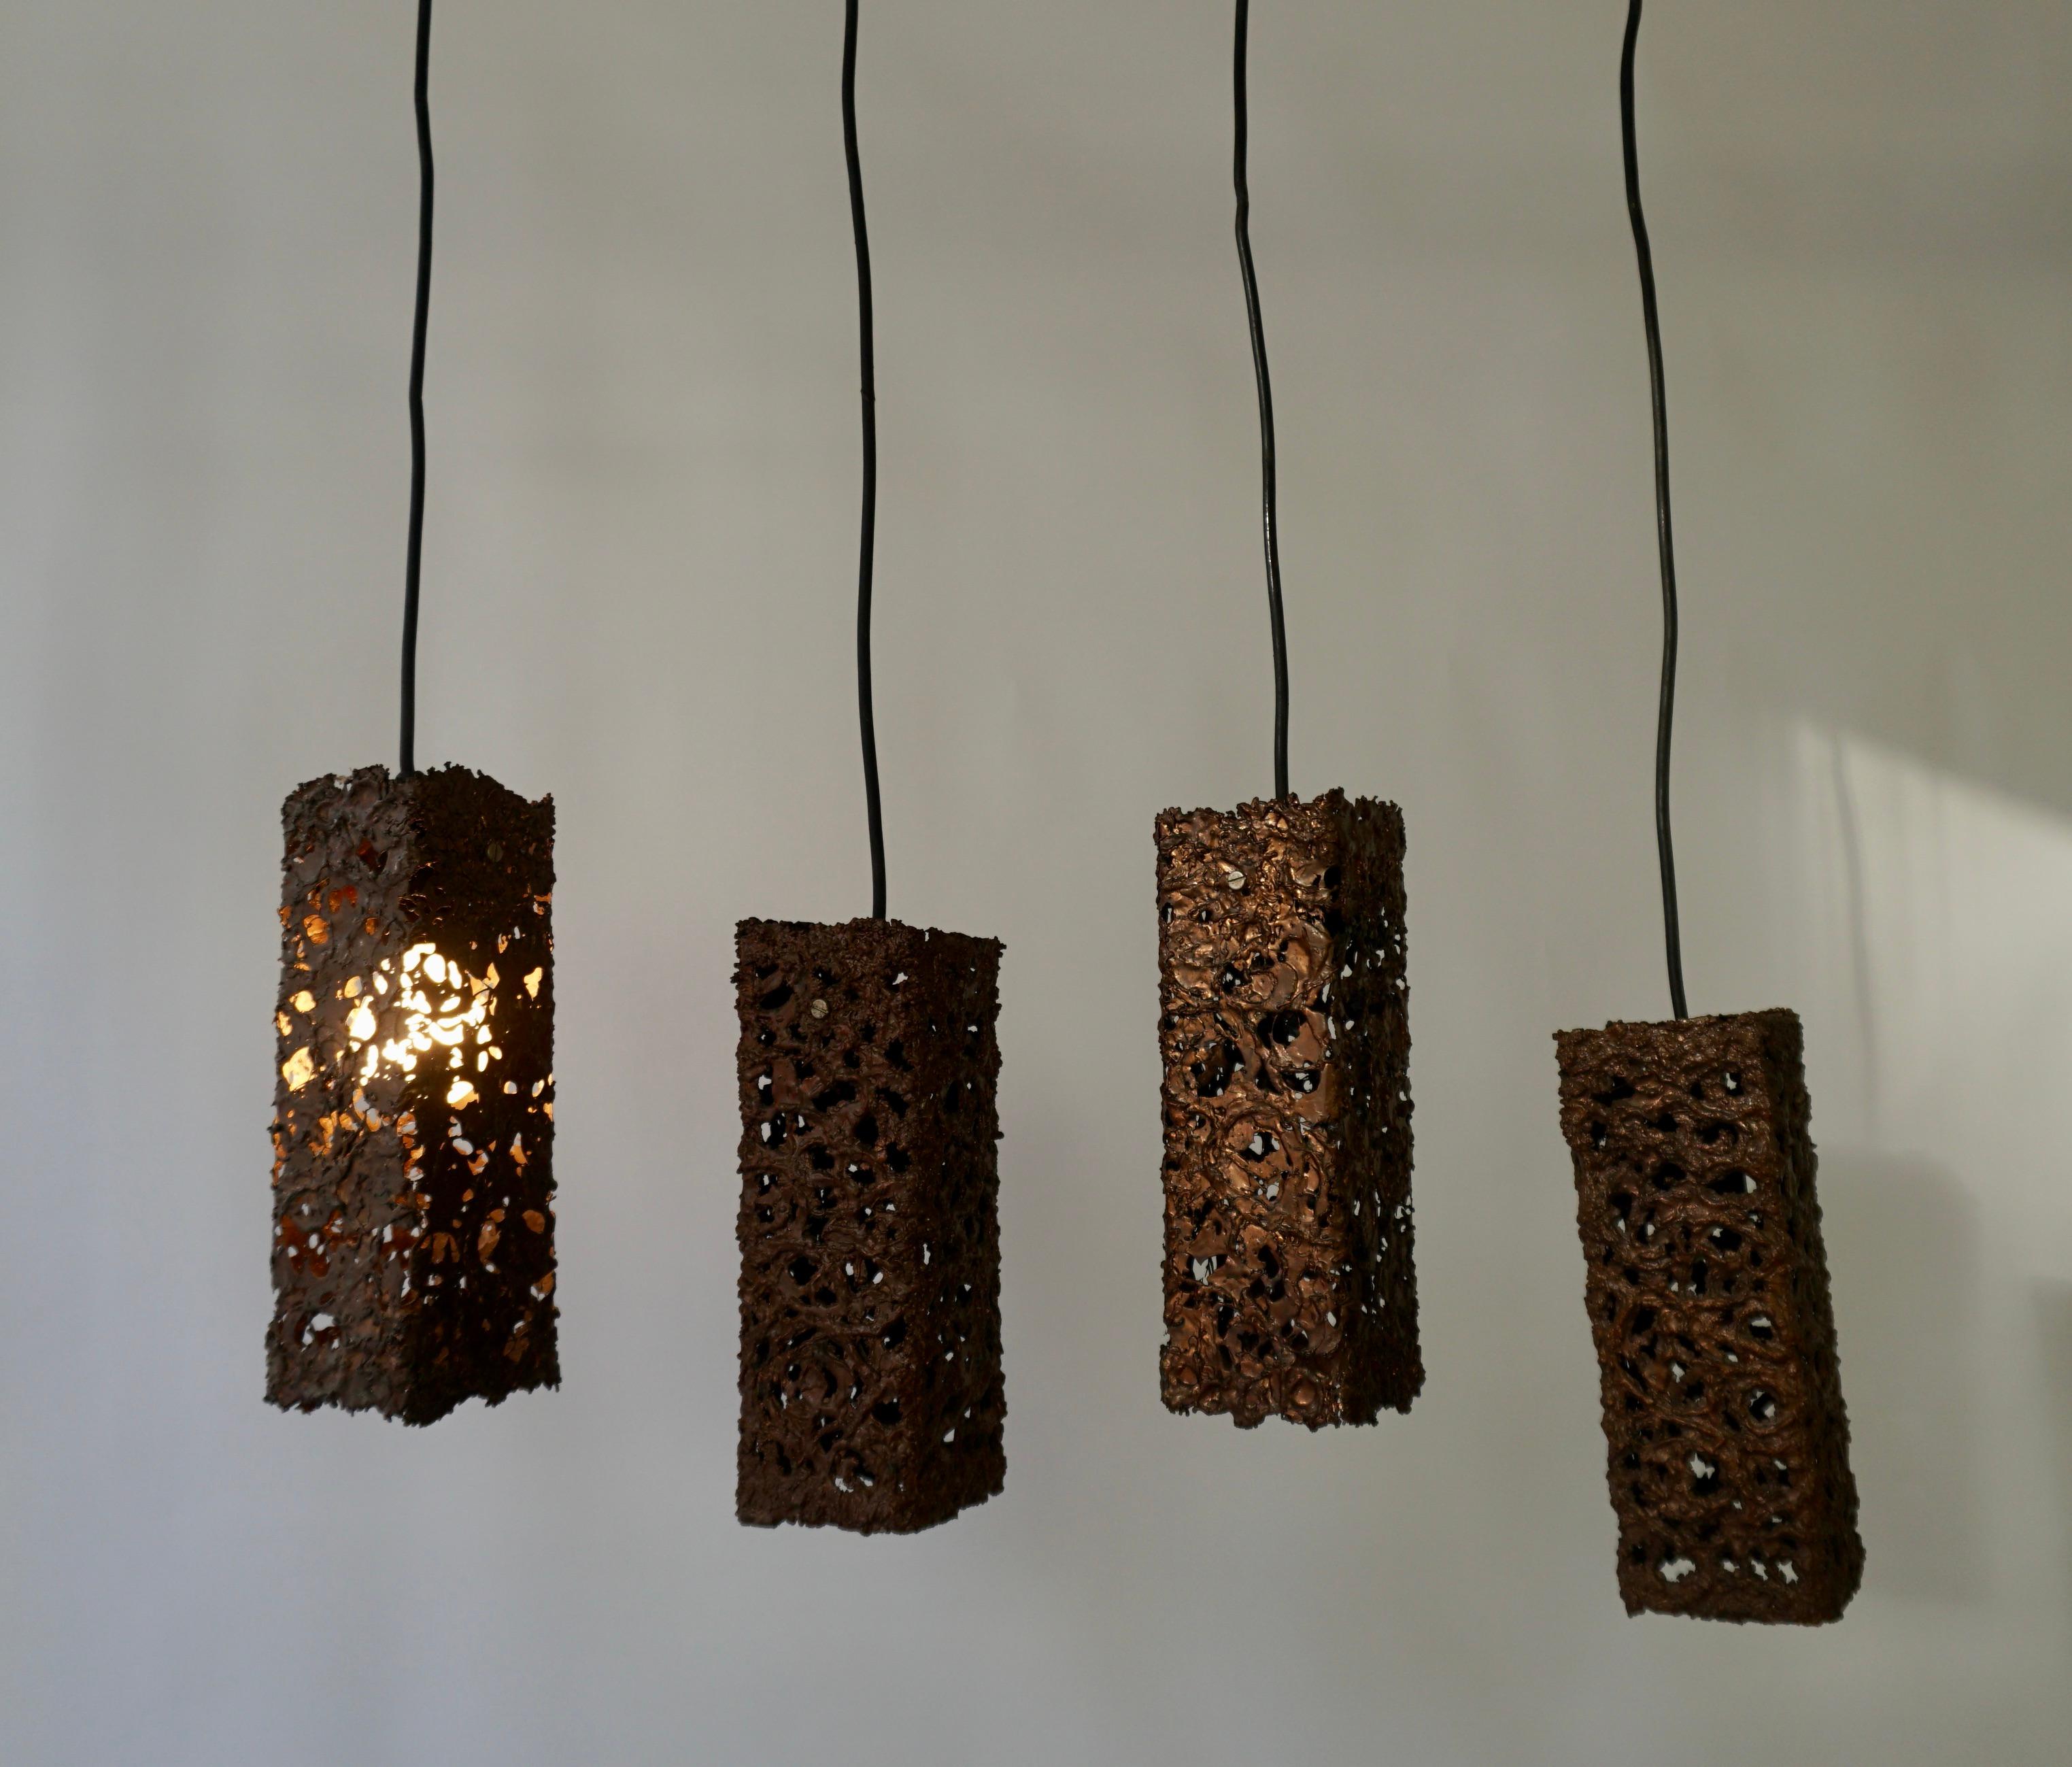 20th Century Four Organic Relief Copper Ceiling Lamp by Aimo Tukiainen Finland, 1960's For Sale